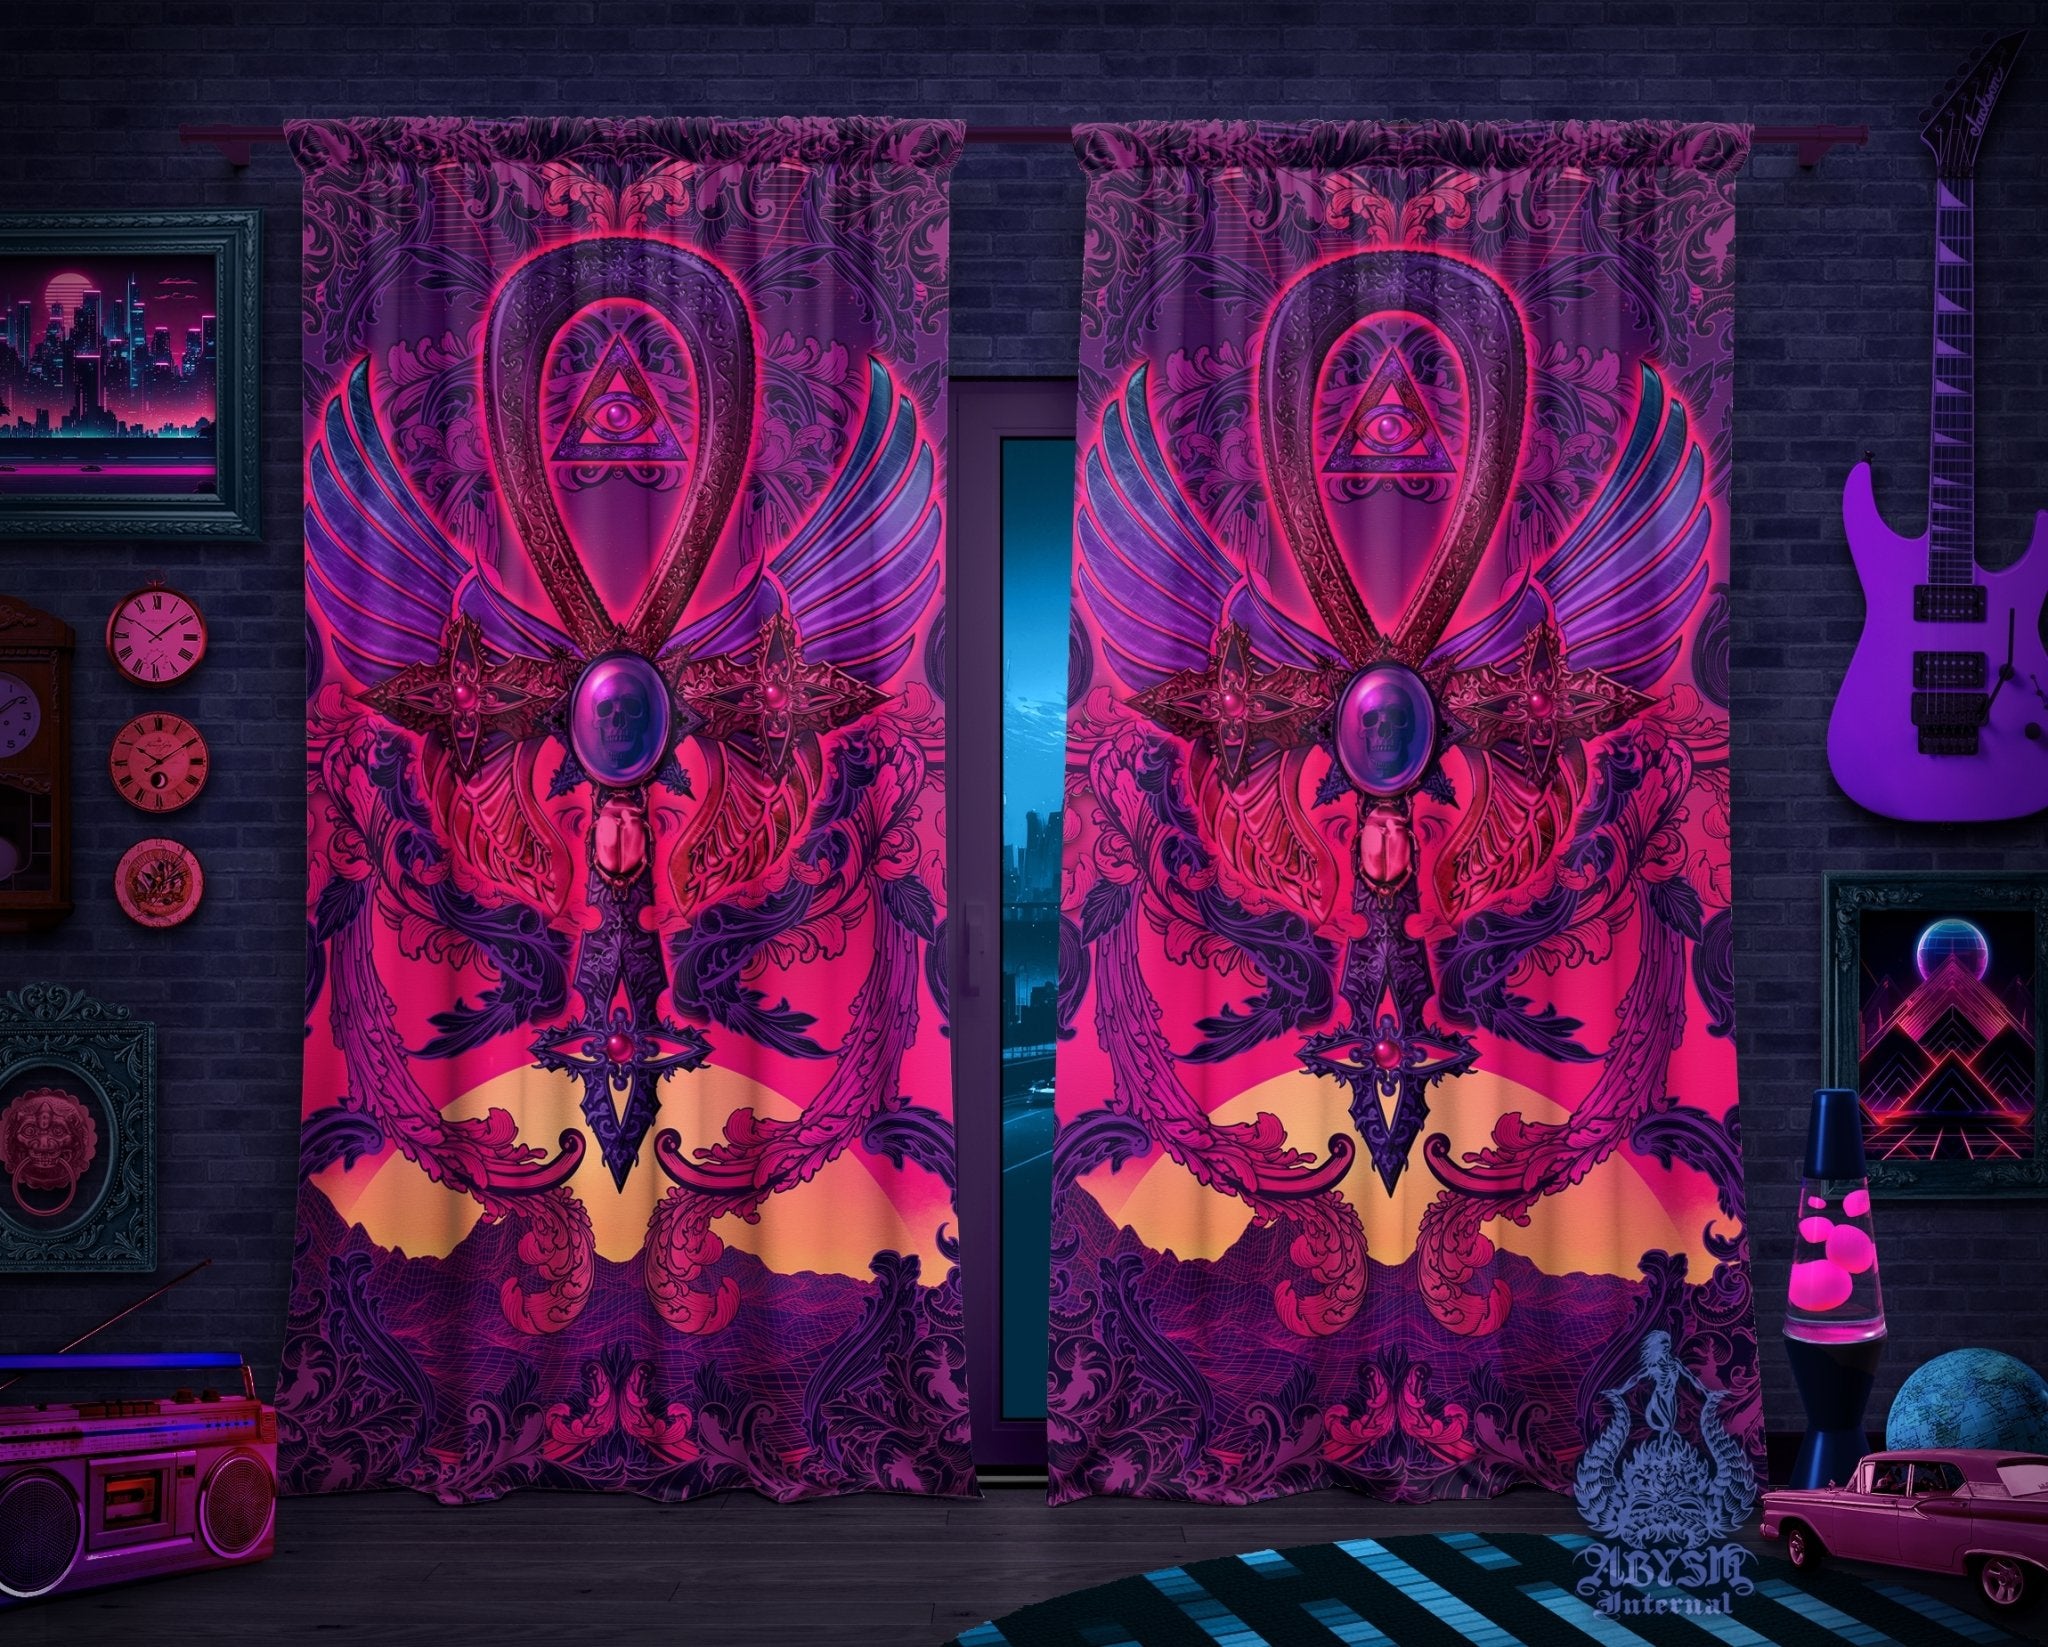 Synthwave Blackout Curtains, Long Window Panels, Psychedelic Art Print, Vaporwave Room Decor, 80s Gamer Retrowave Home and Shop Decor - Ankh - Abysm Internal